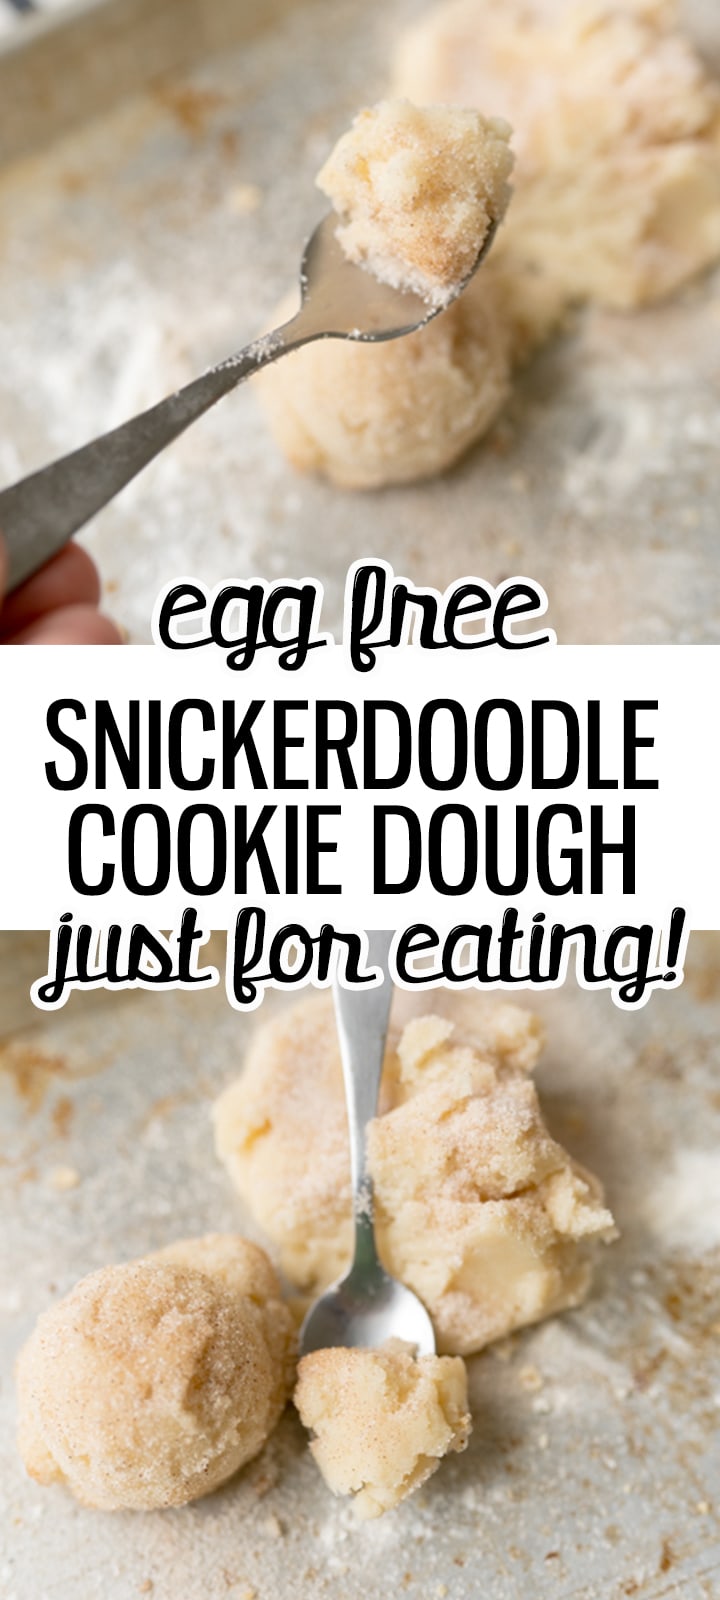 snickerdoodle pin image